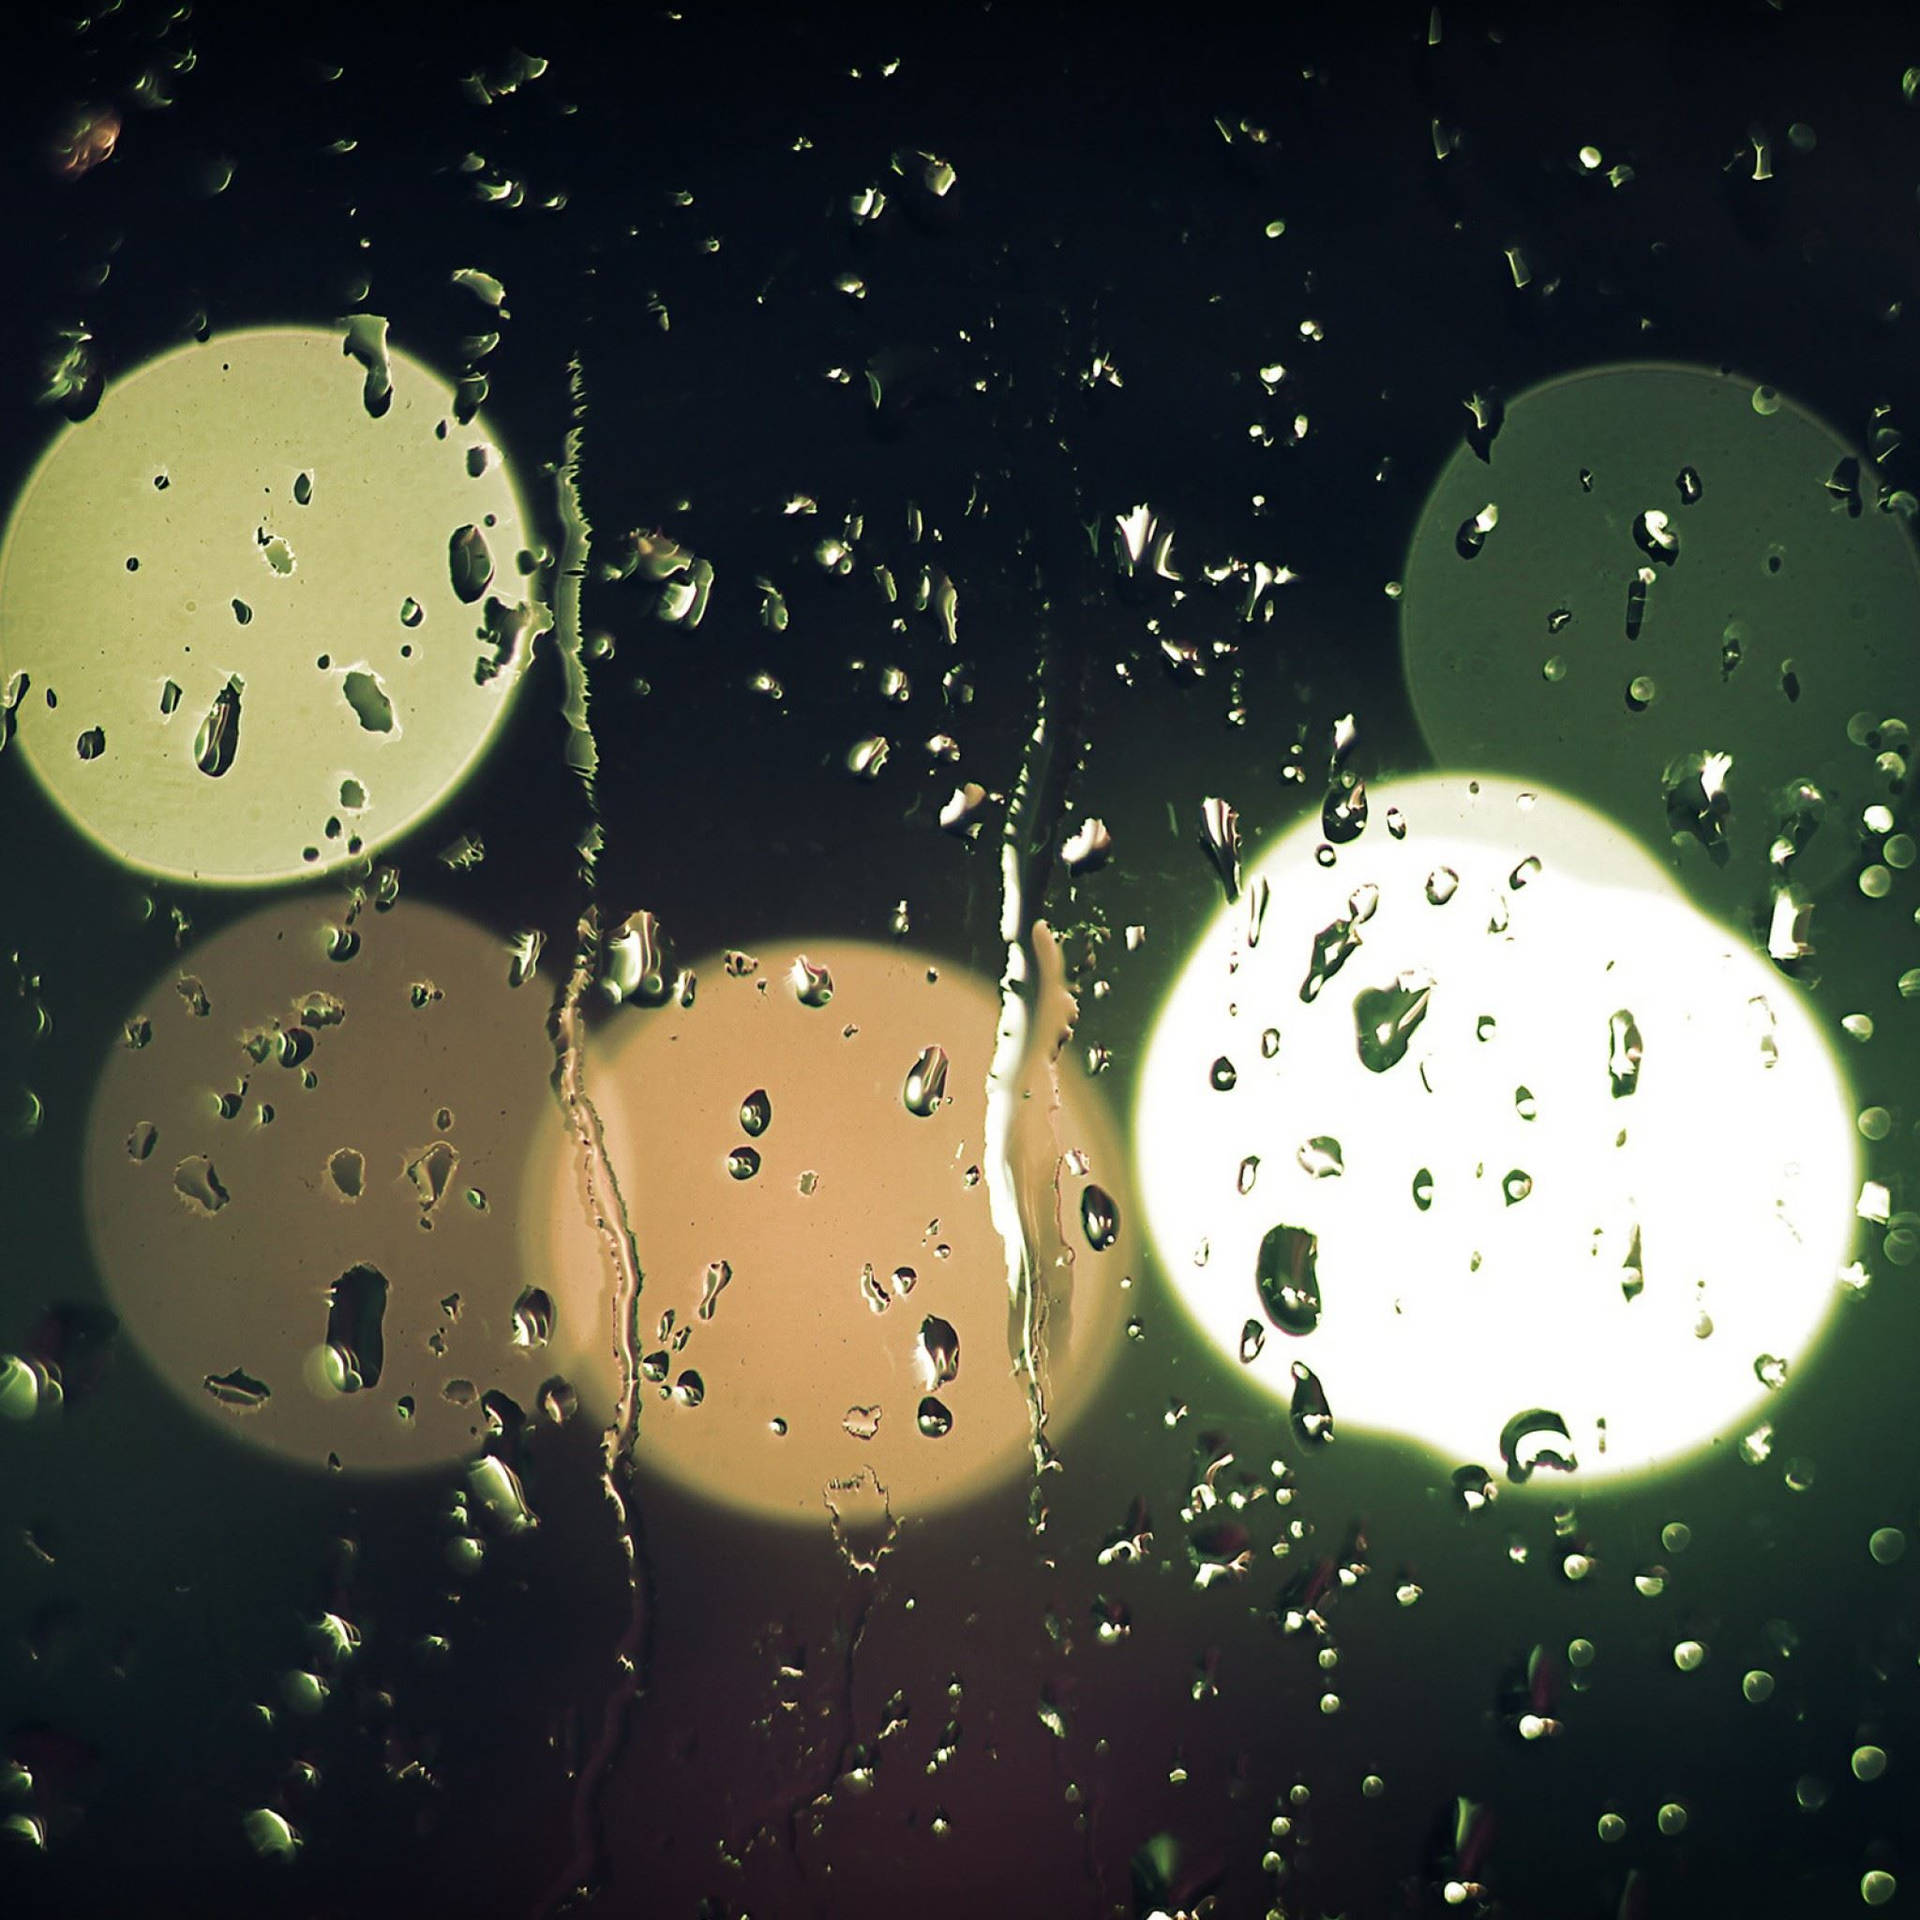 Falling Raindrops With Colorful Light Orbs Background